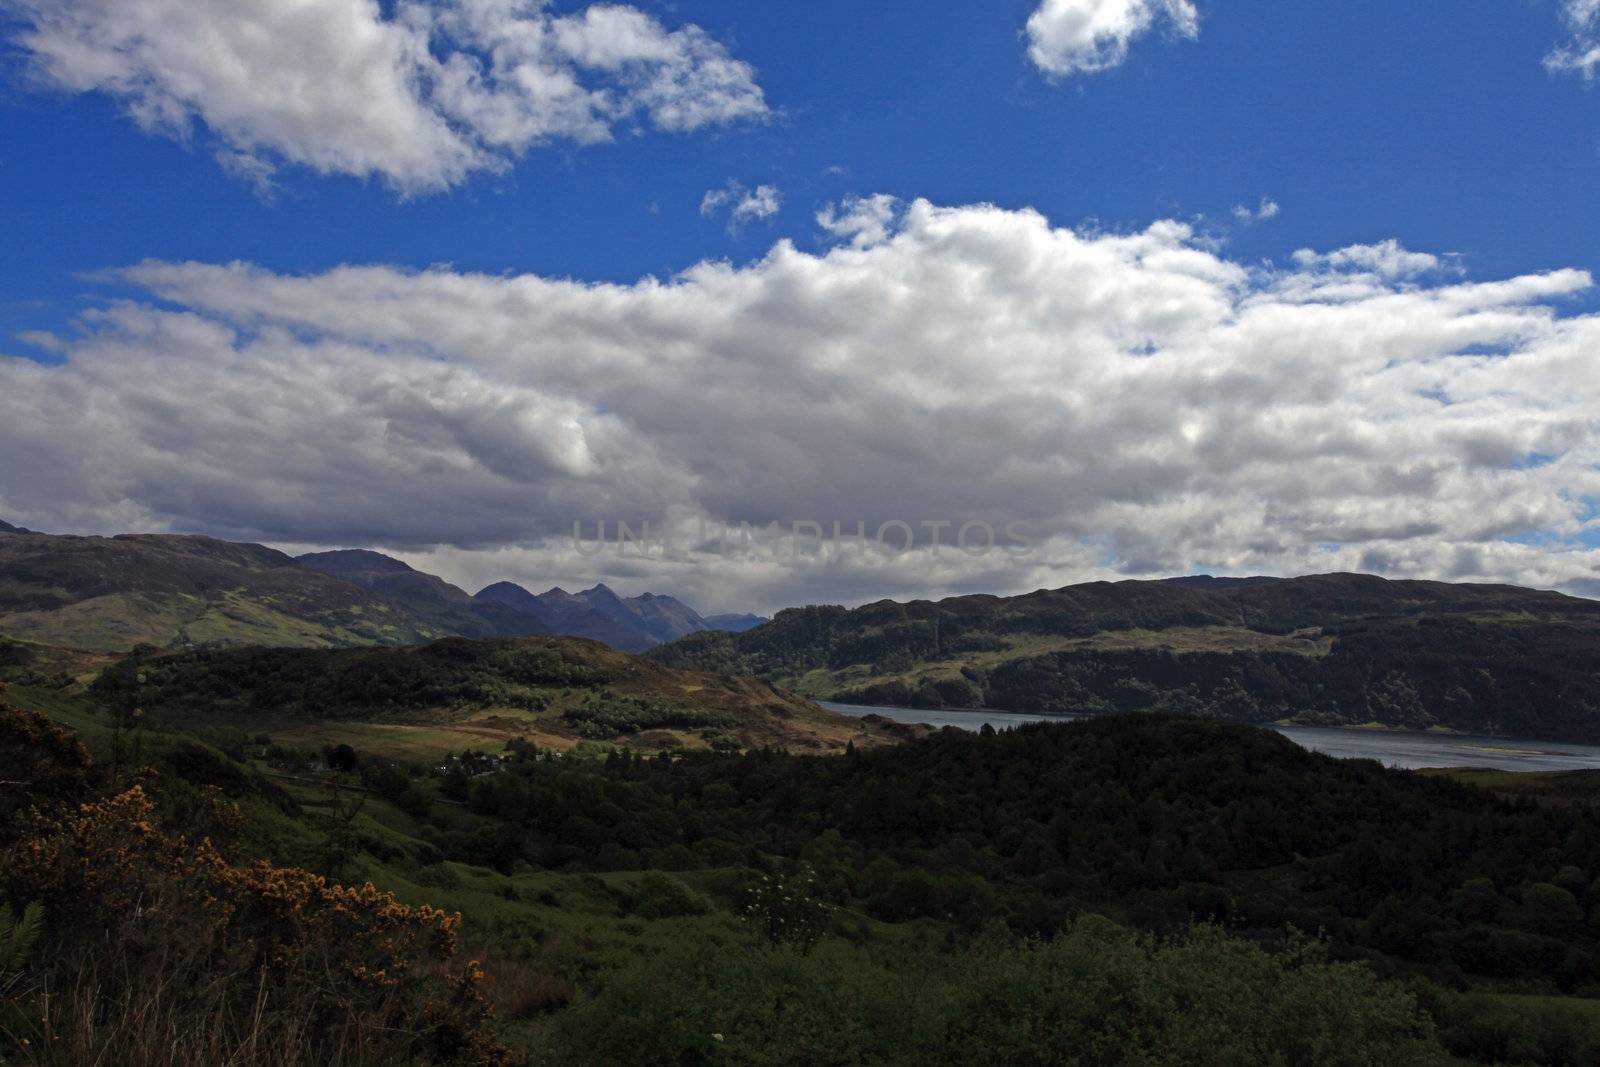 Loch Duich within th Scottish highlands in summer time